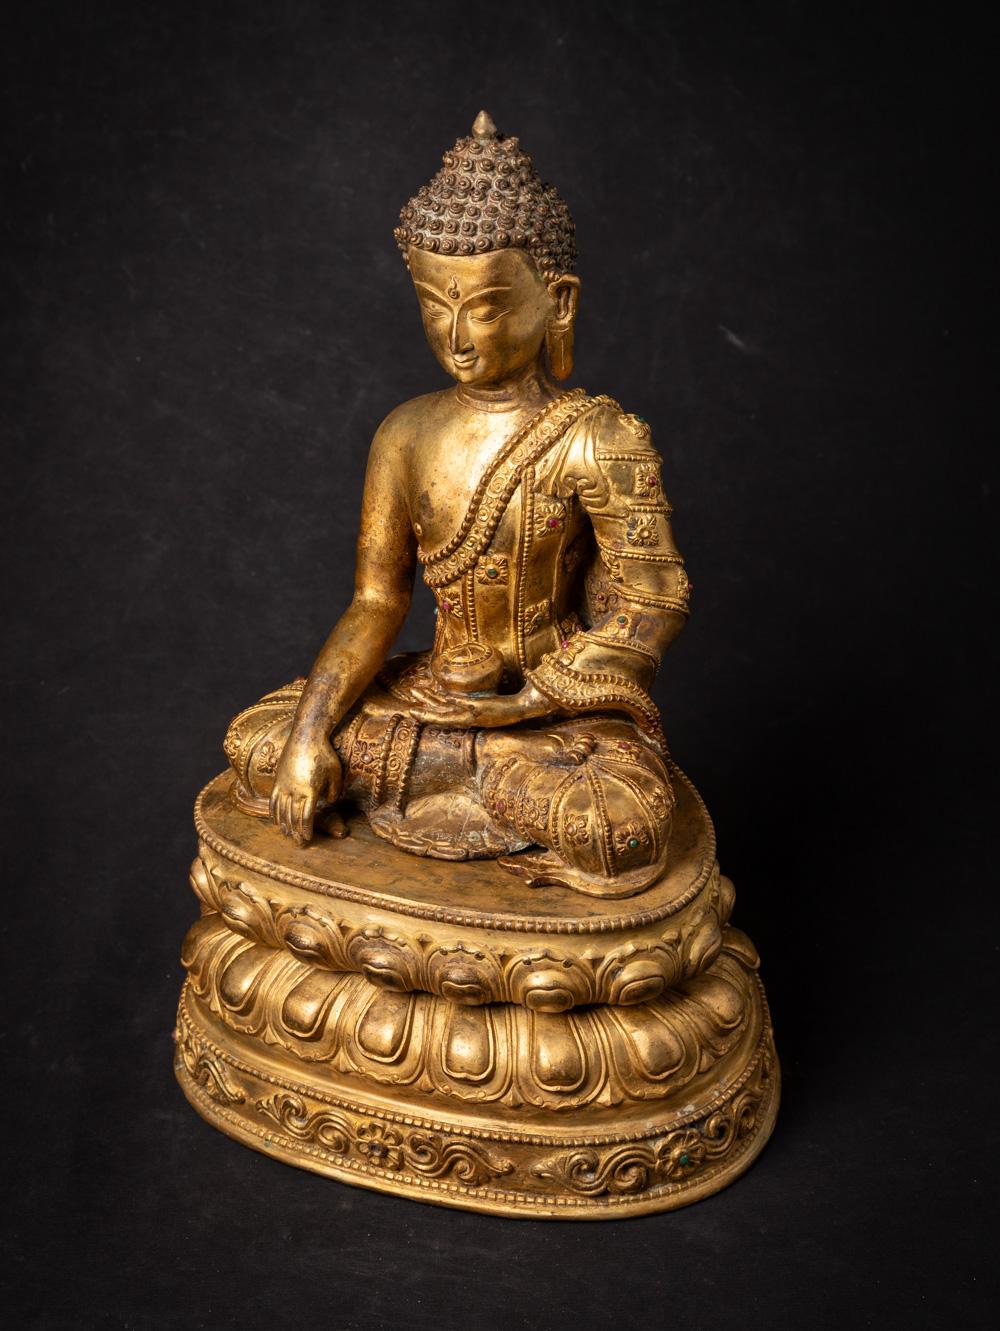 Mid-20th century old bronze Nepali Buddha statue i20.5nlaid with real gem stones 7